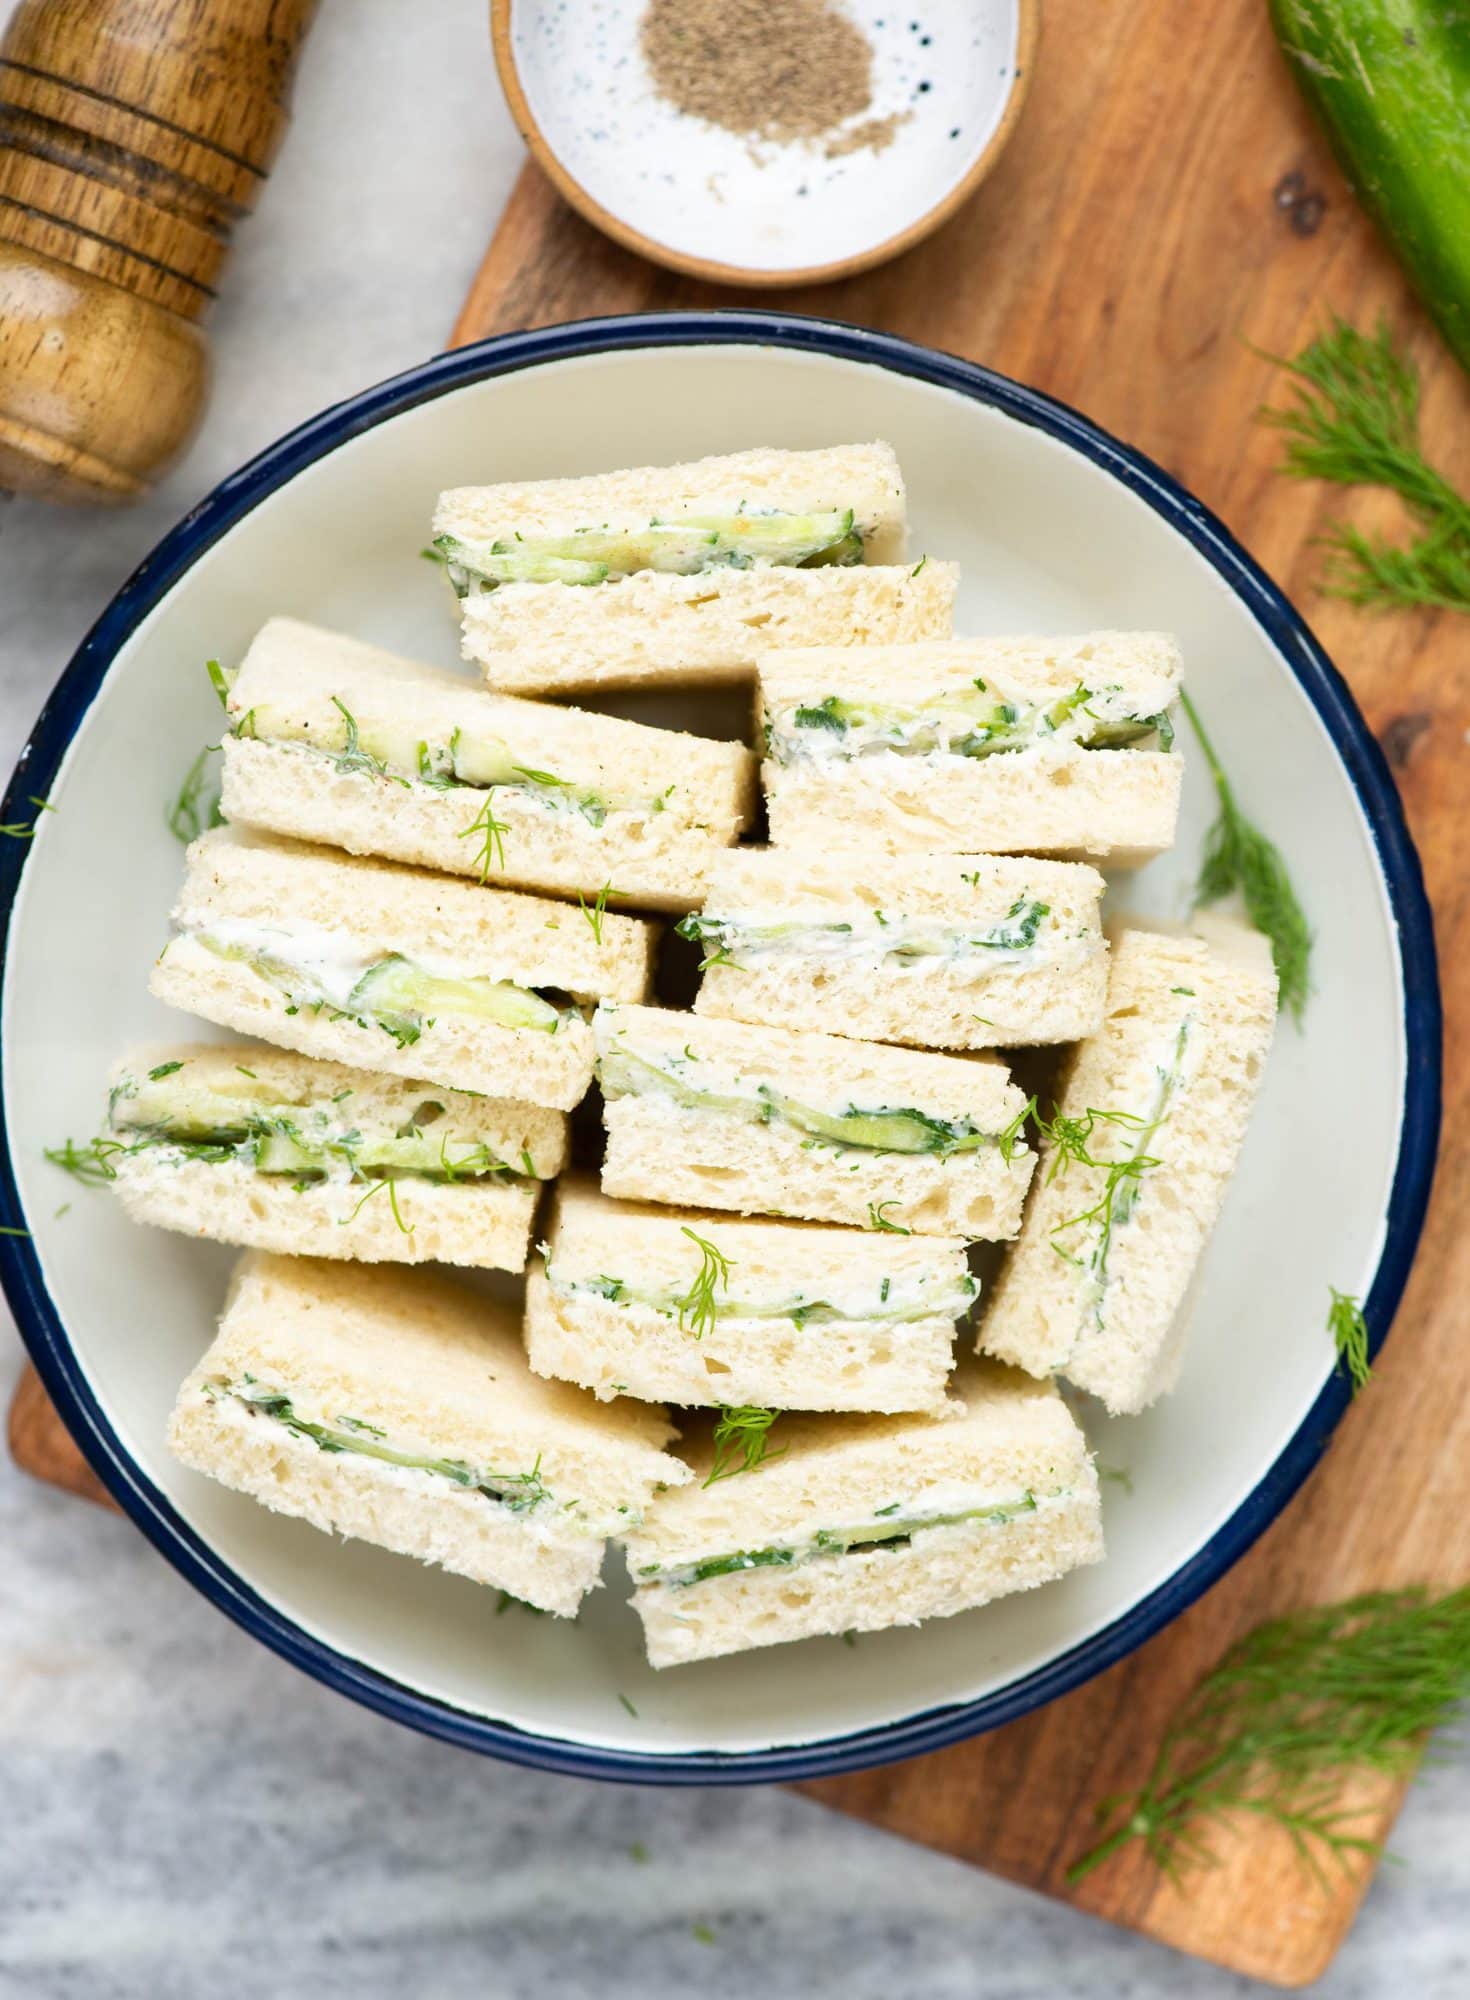 Cucumber sandwiches cut into halves and arranged in a big plate.